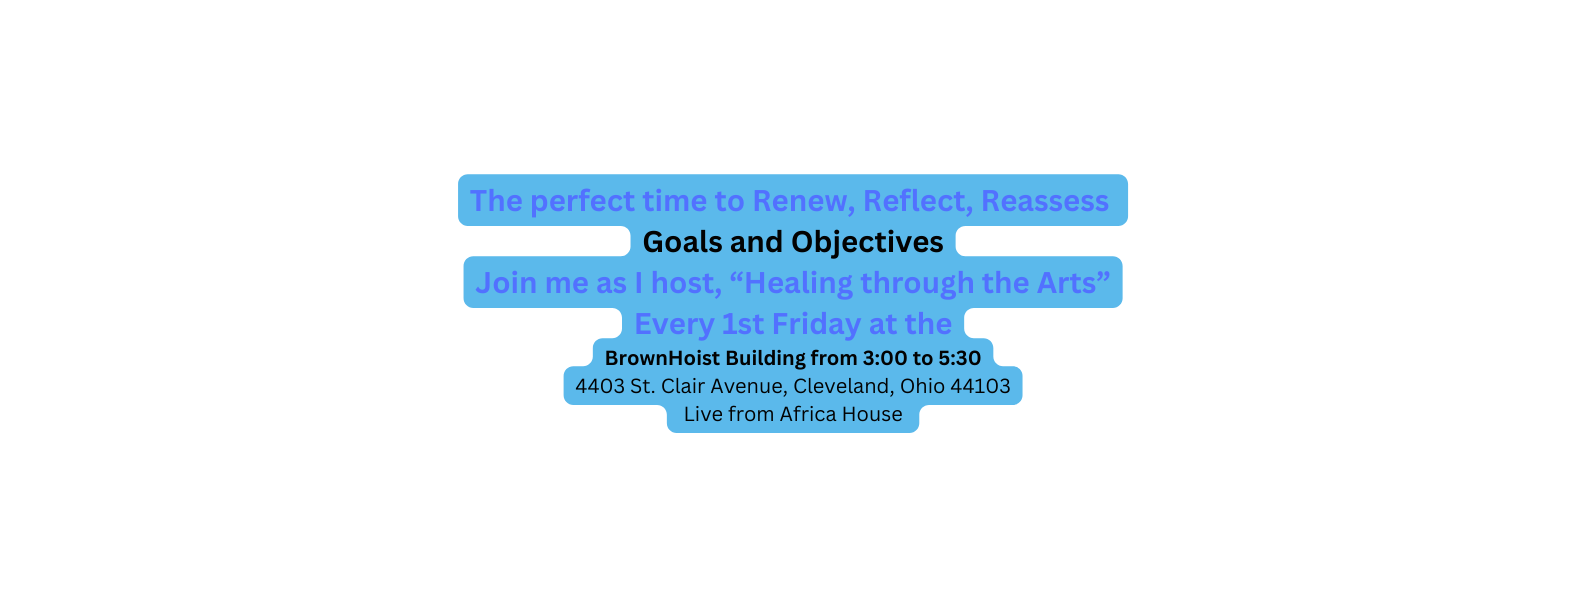 The perfect time to Renew Reflect Reassess Goals and Objectives Join me as I host Healing through the Arts Every 1st Friday at the BrownHoist Building from 3 00 to 5 30 4403 St Clair Avenue Cleveland Ohio 44103 Live from Africa House